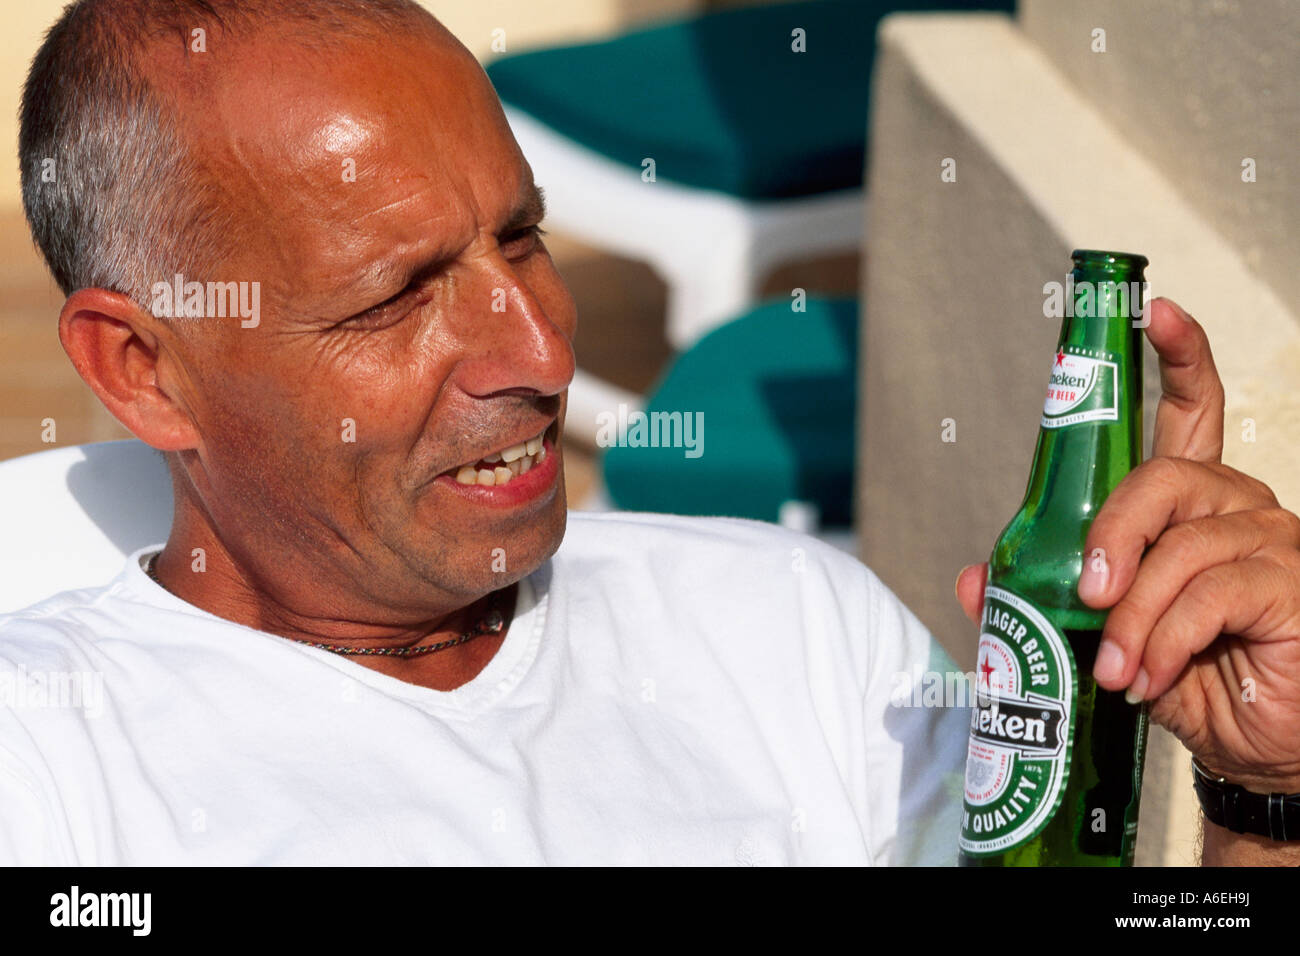 Man Drinking Beer Model Released Stock Photo - Alamy